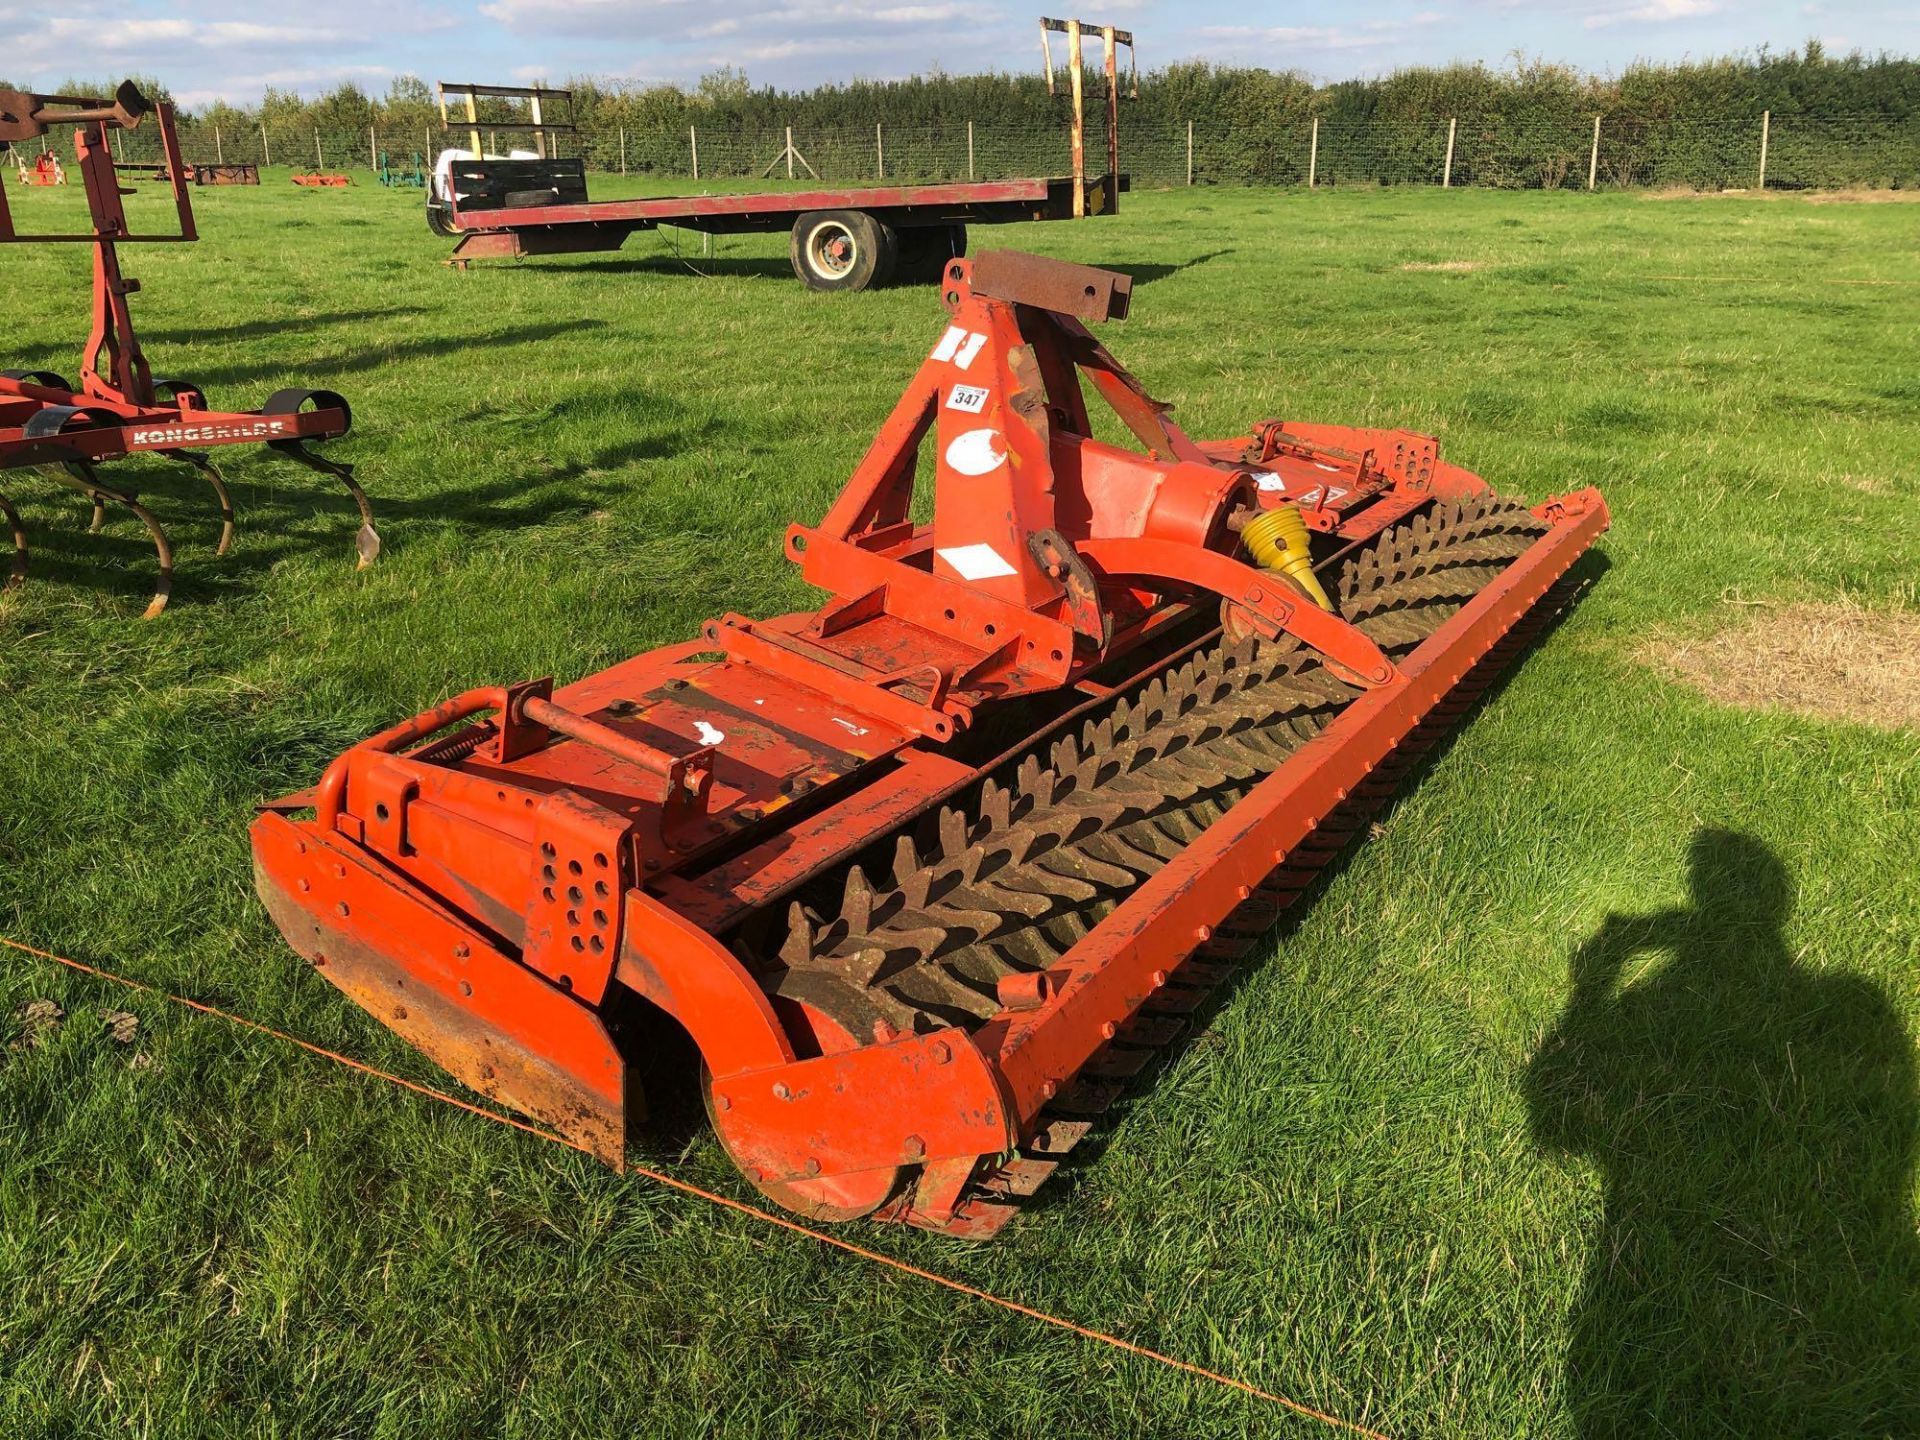 Kuhn HR4001D 4m power harrow with packer roller - Image 2 of 4